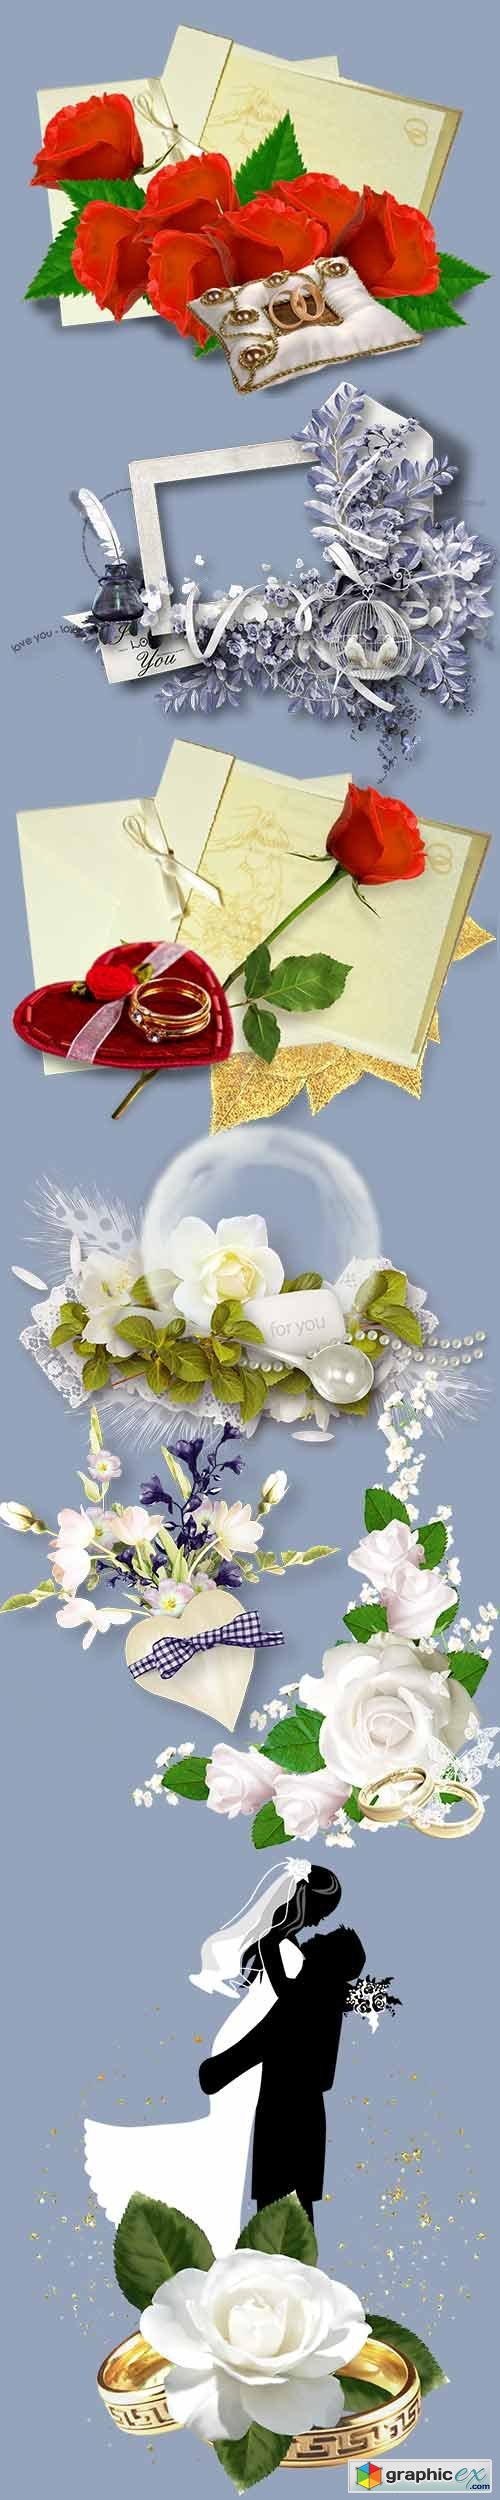 Clusters and png cliparts for wedding design